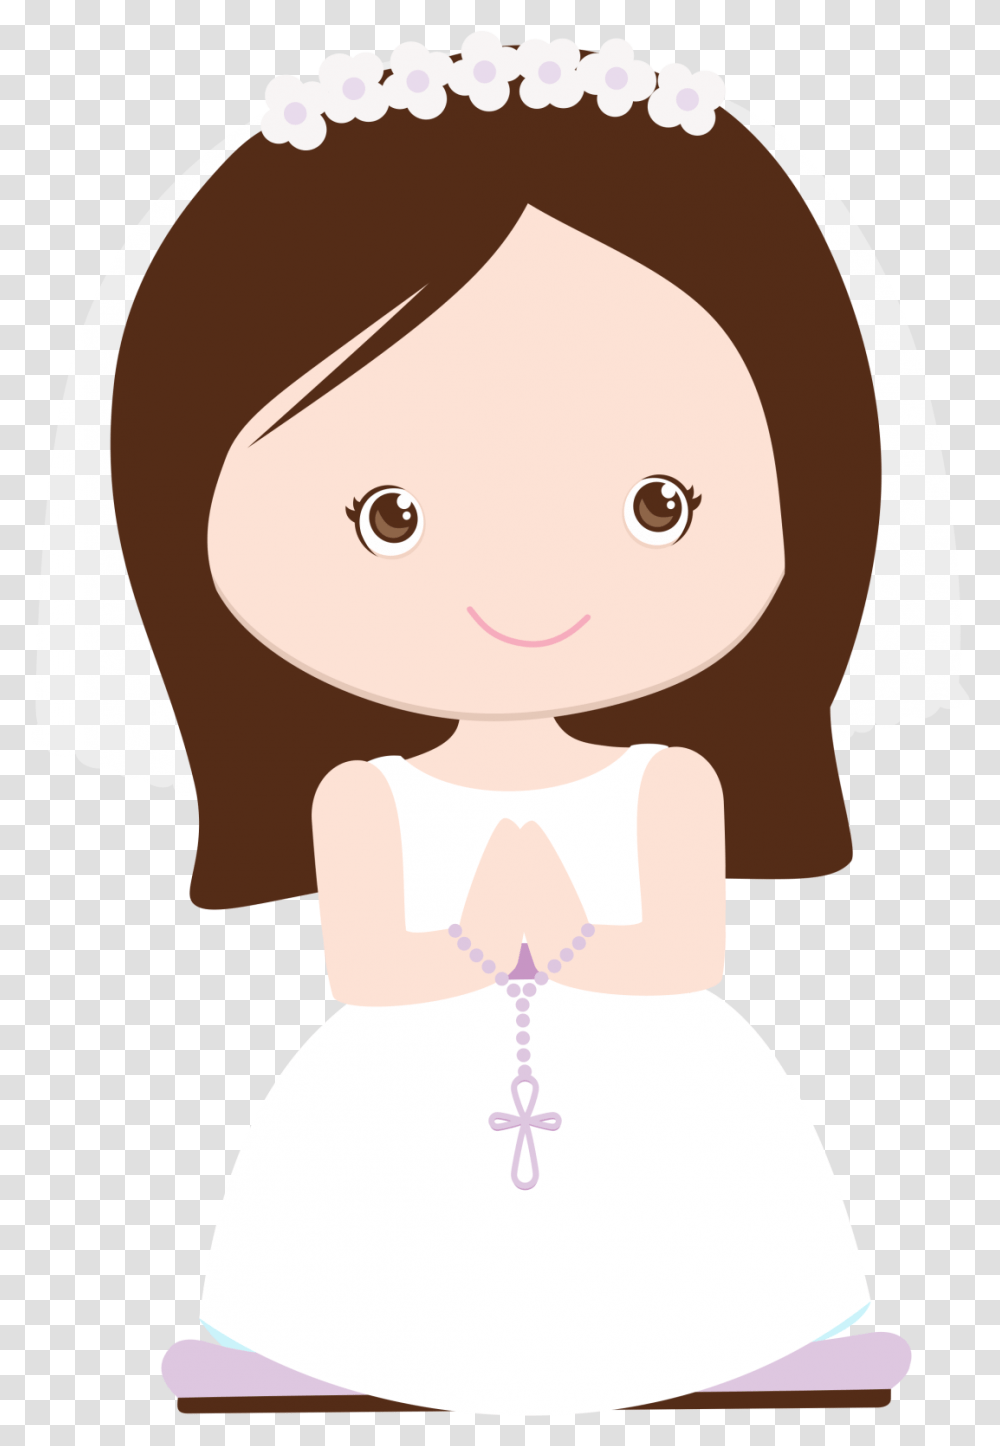 Clipart Communion Girl Wave Hair 1 Image Clipart Communion Girl Wave Hair, Doll, Toy, Head, Snowman Transparent Png